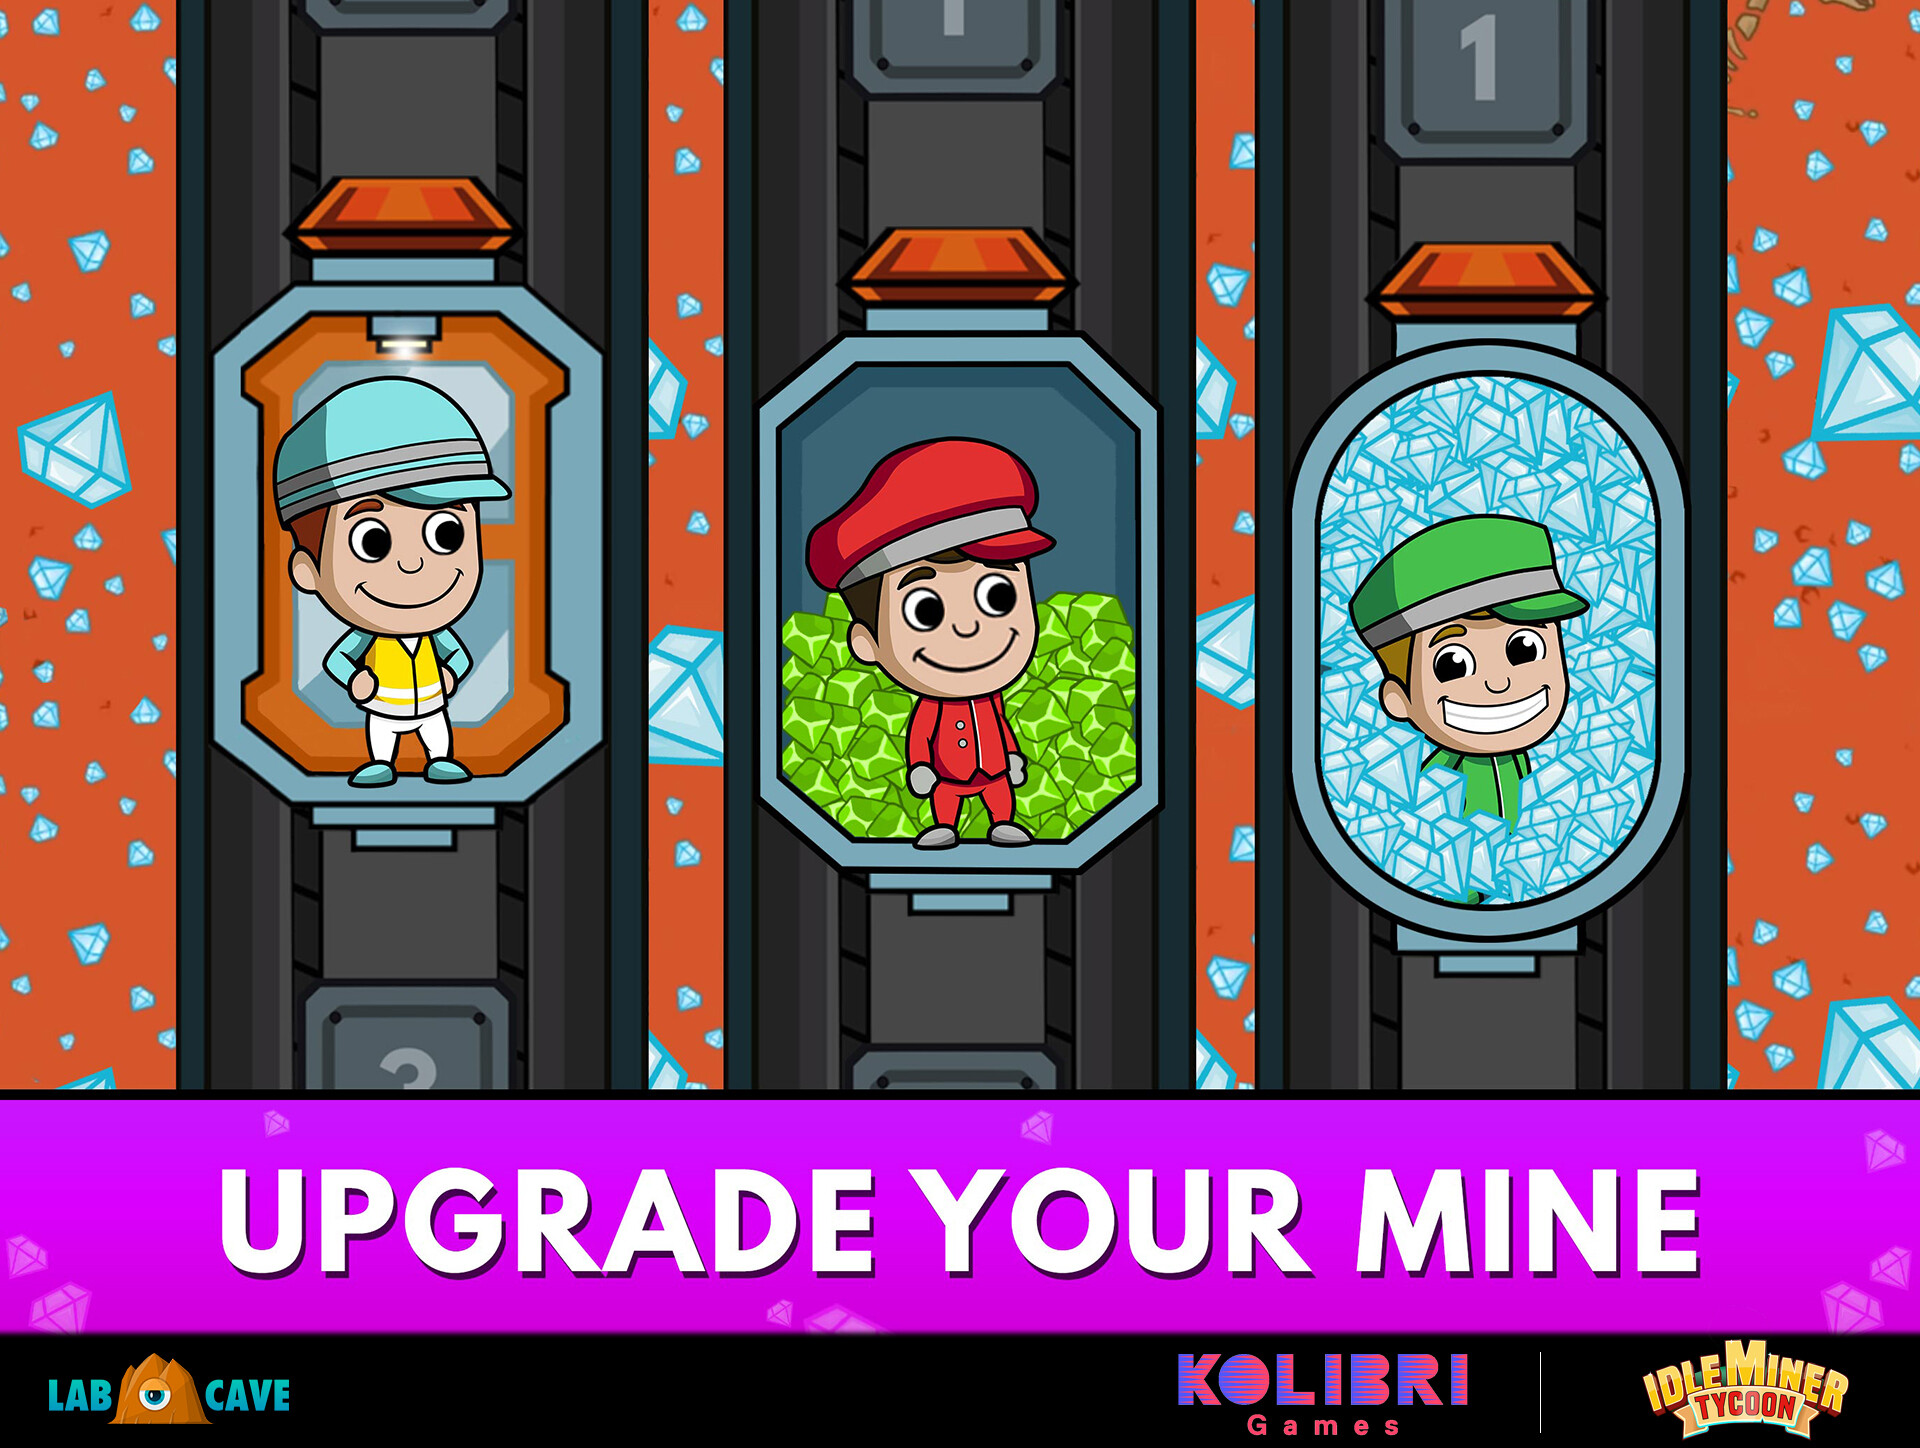 Idle Miner Tycoon: Tips & Strategies — Lenny's Blog